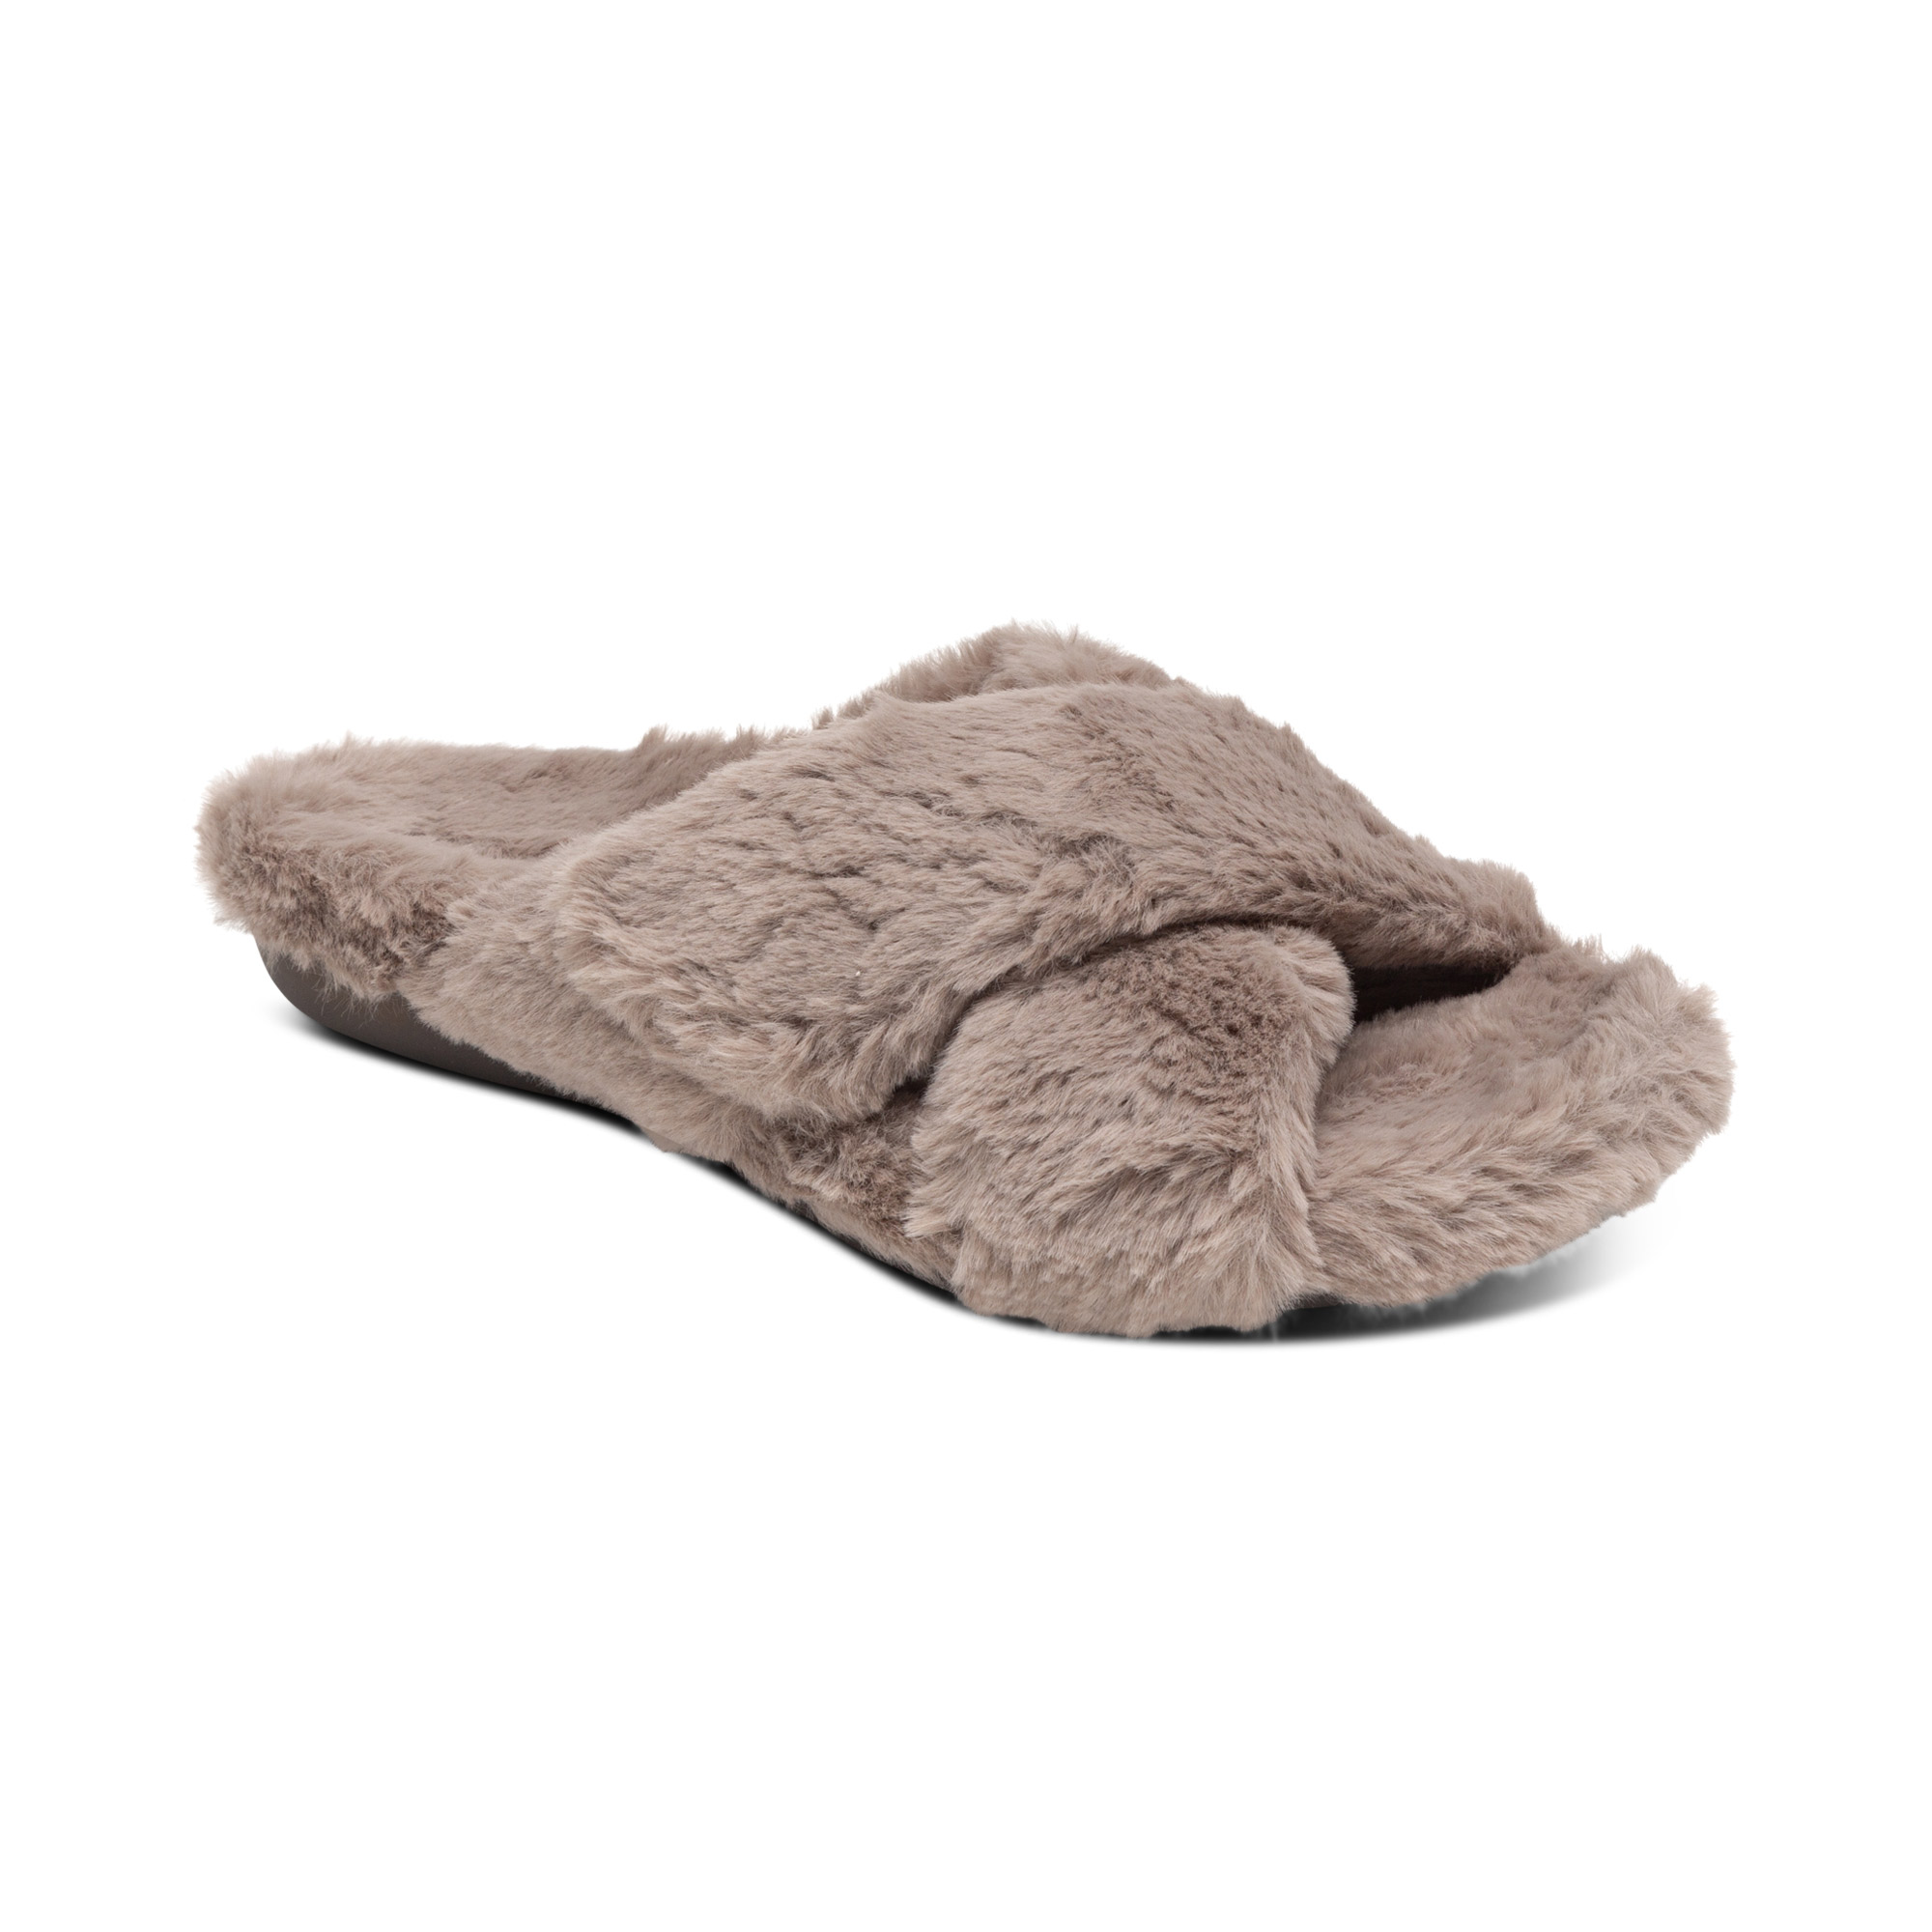 Furry Faux Fur Fuzzy Slippers Cute Fluffy Sandals, Pink, 24 Pairs